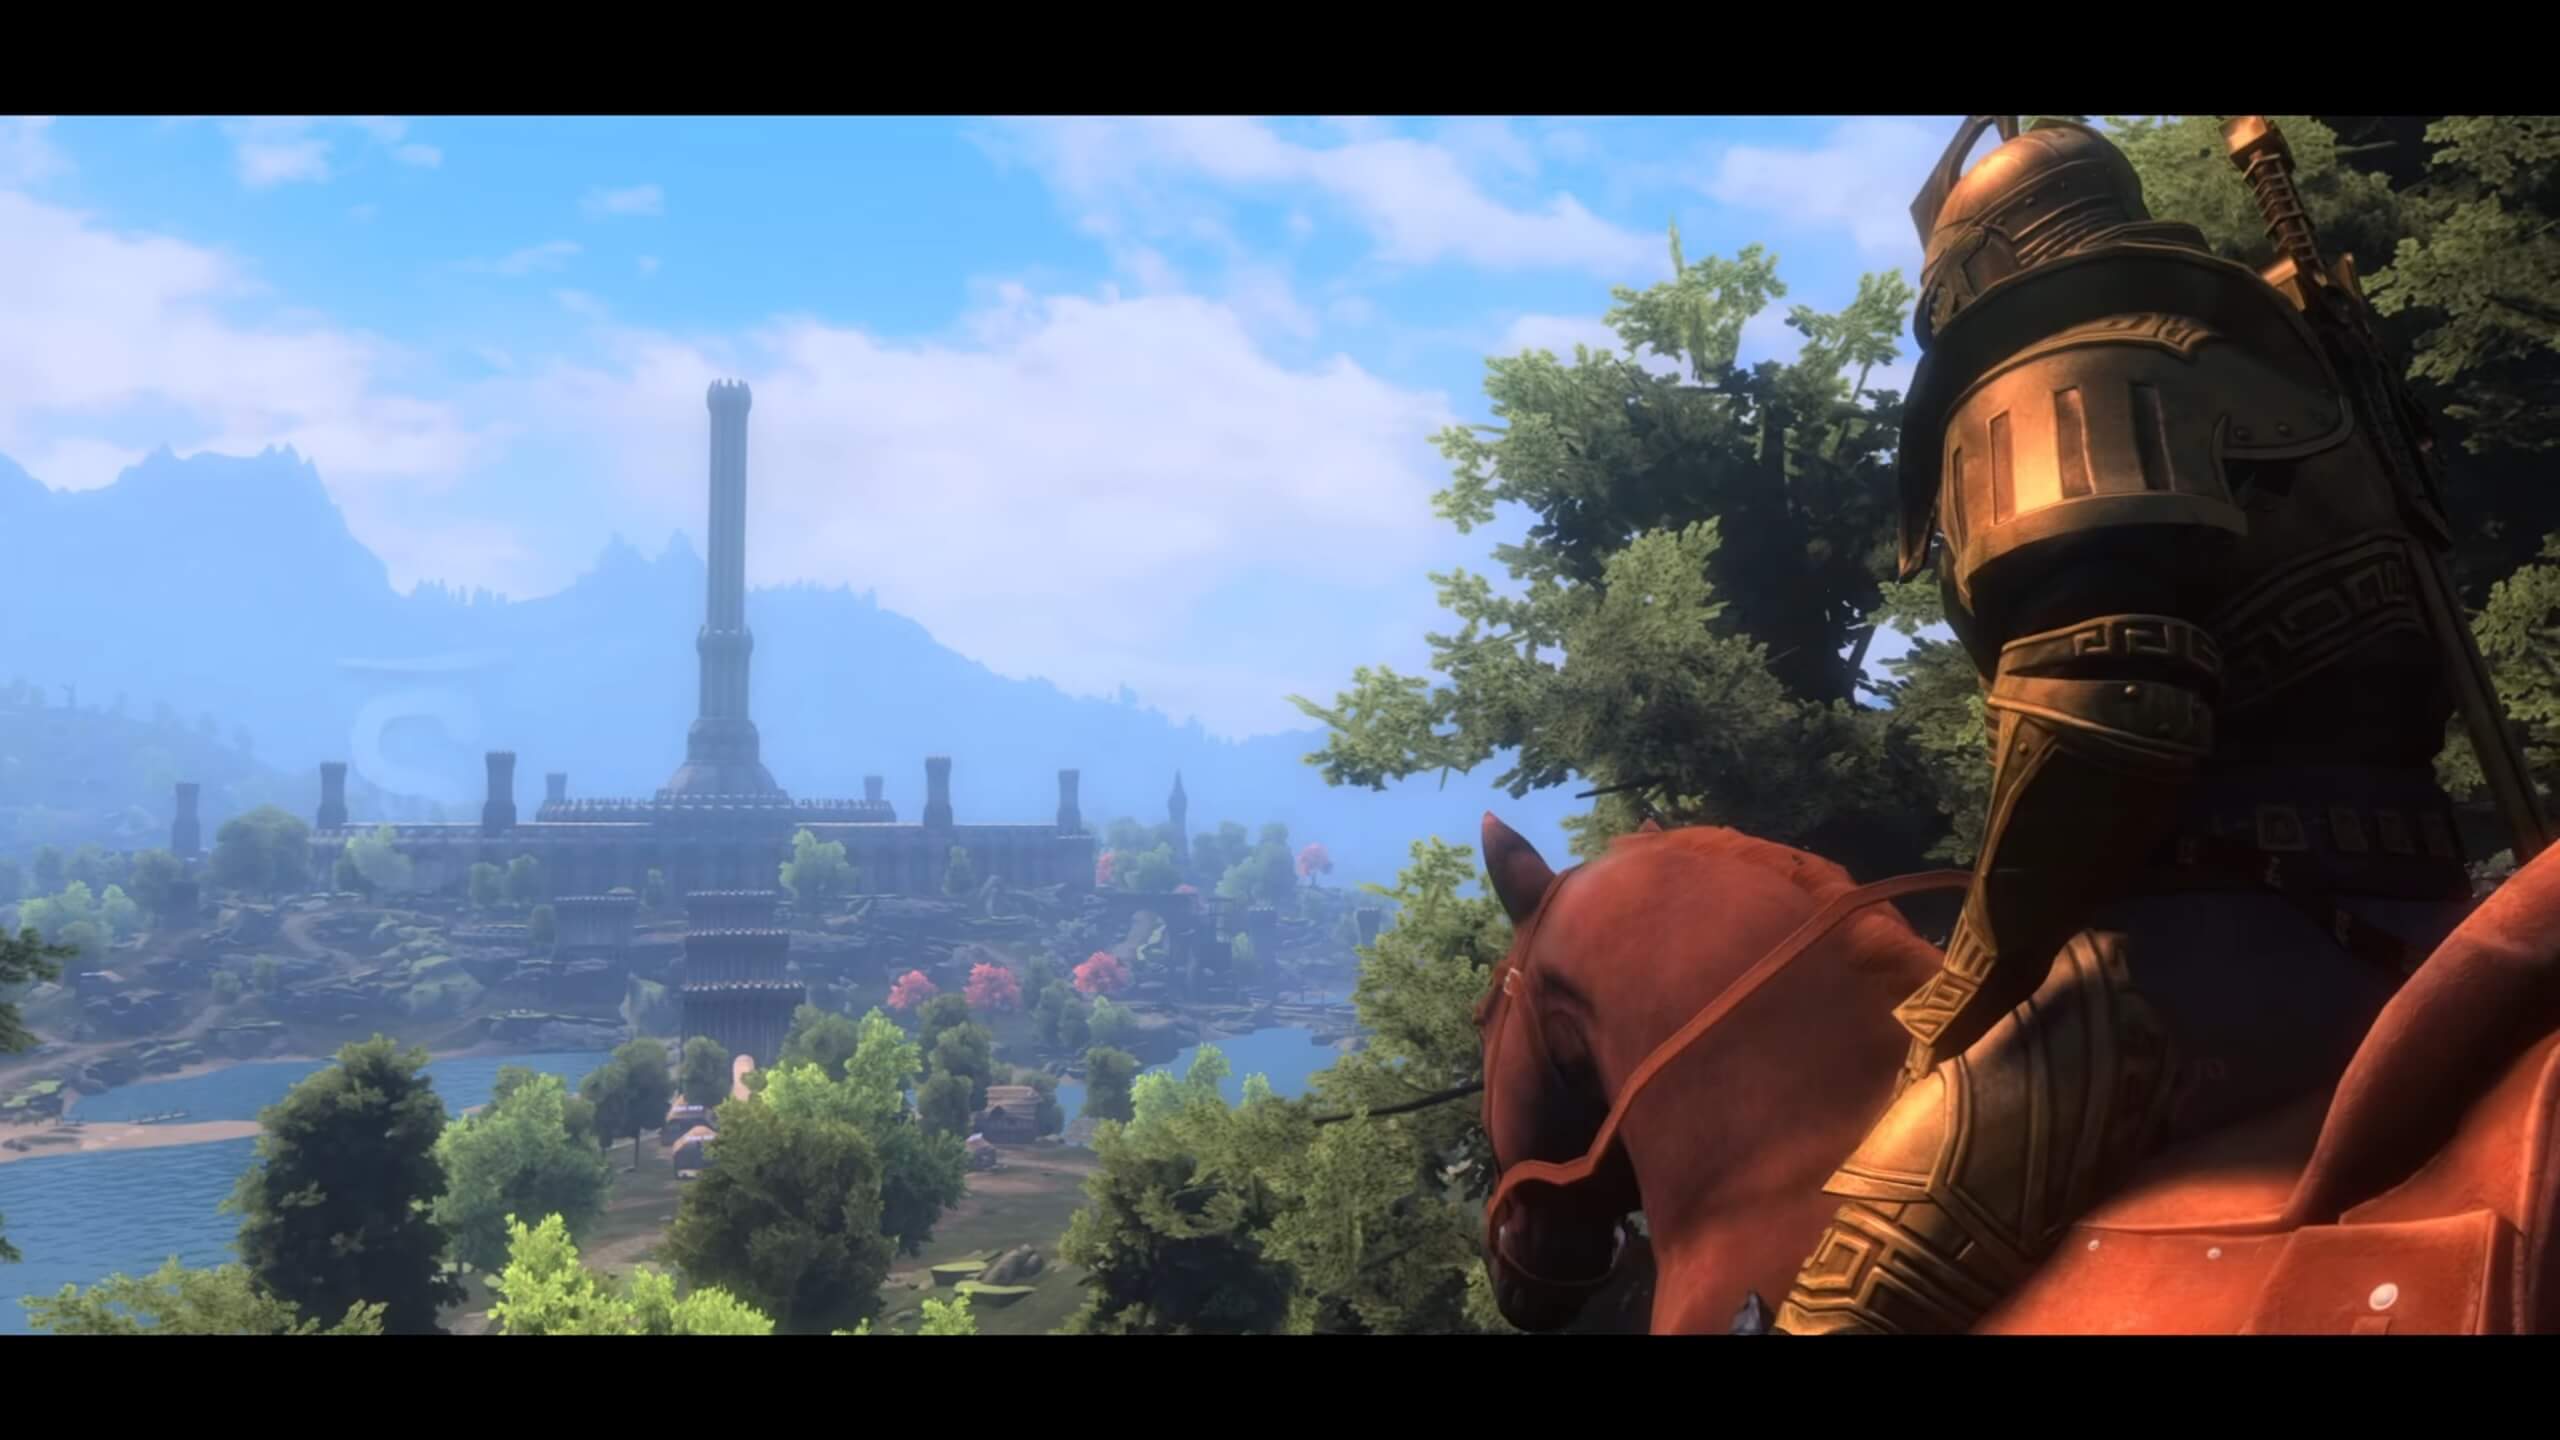 Skyblivion, Oblivion Remake in Skyrim, looks better than ever in this latest gameplay video